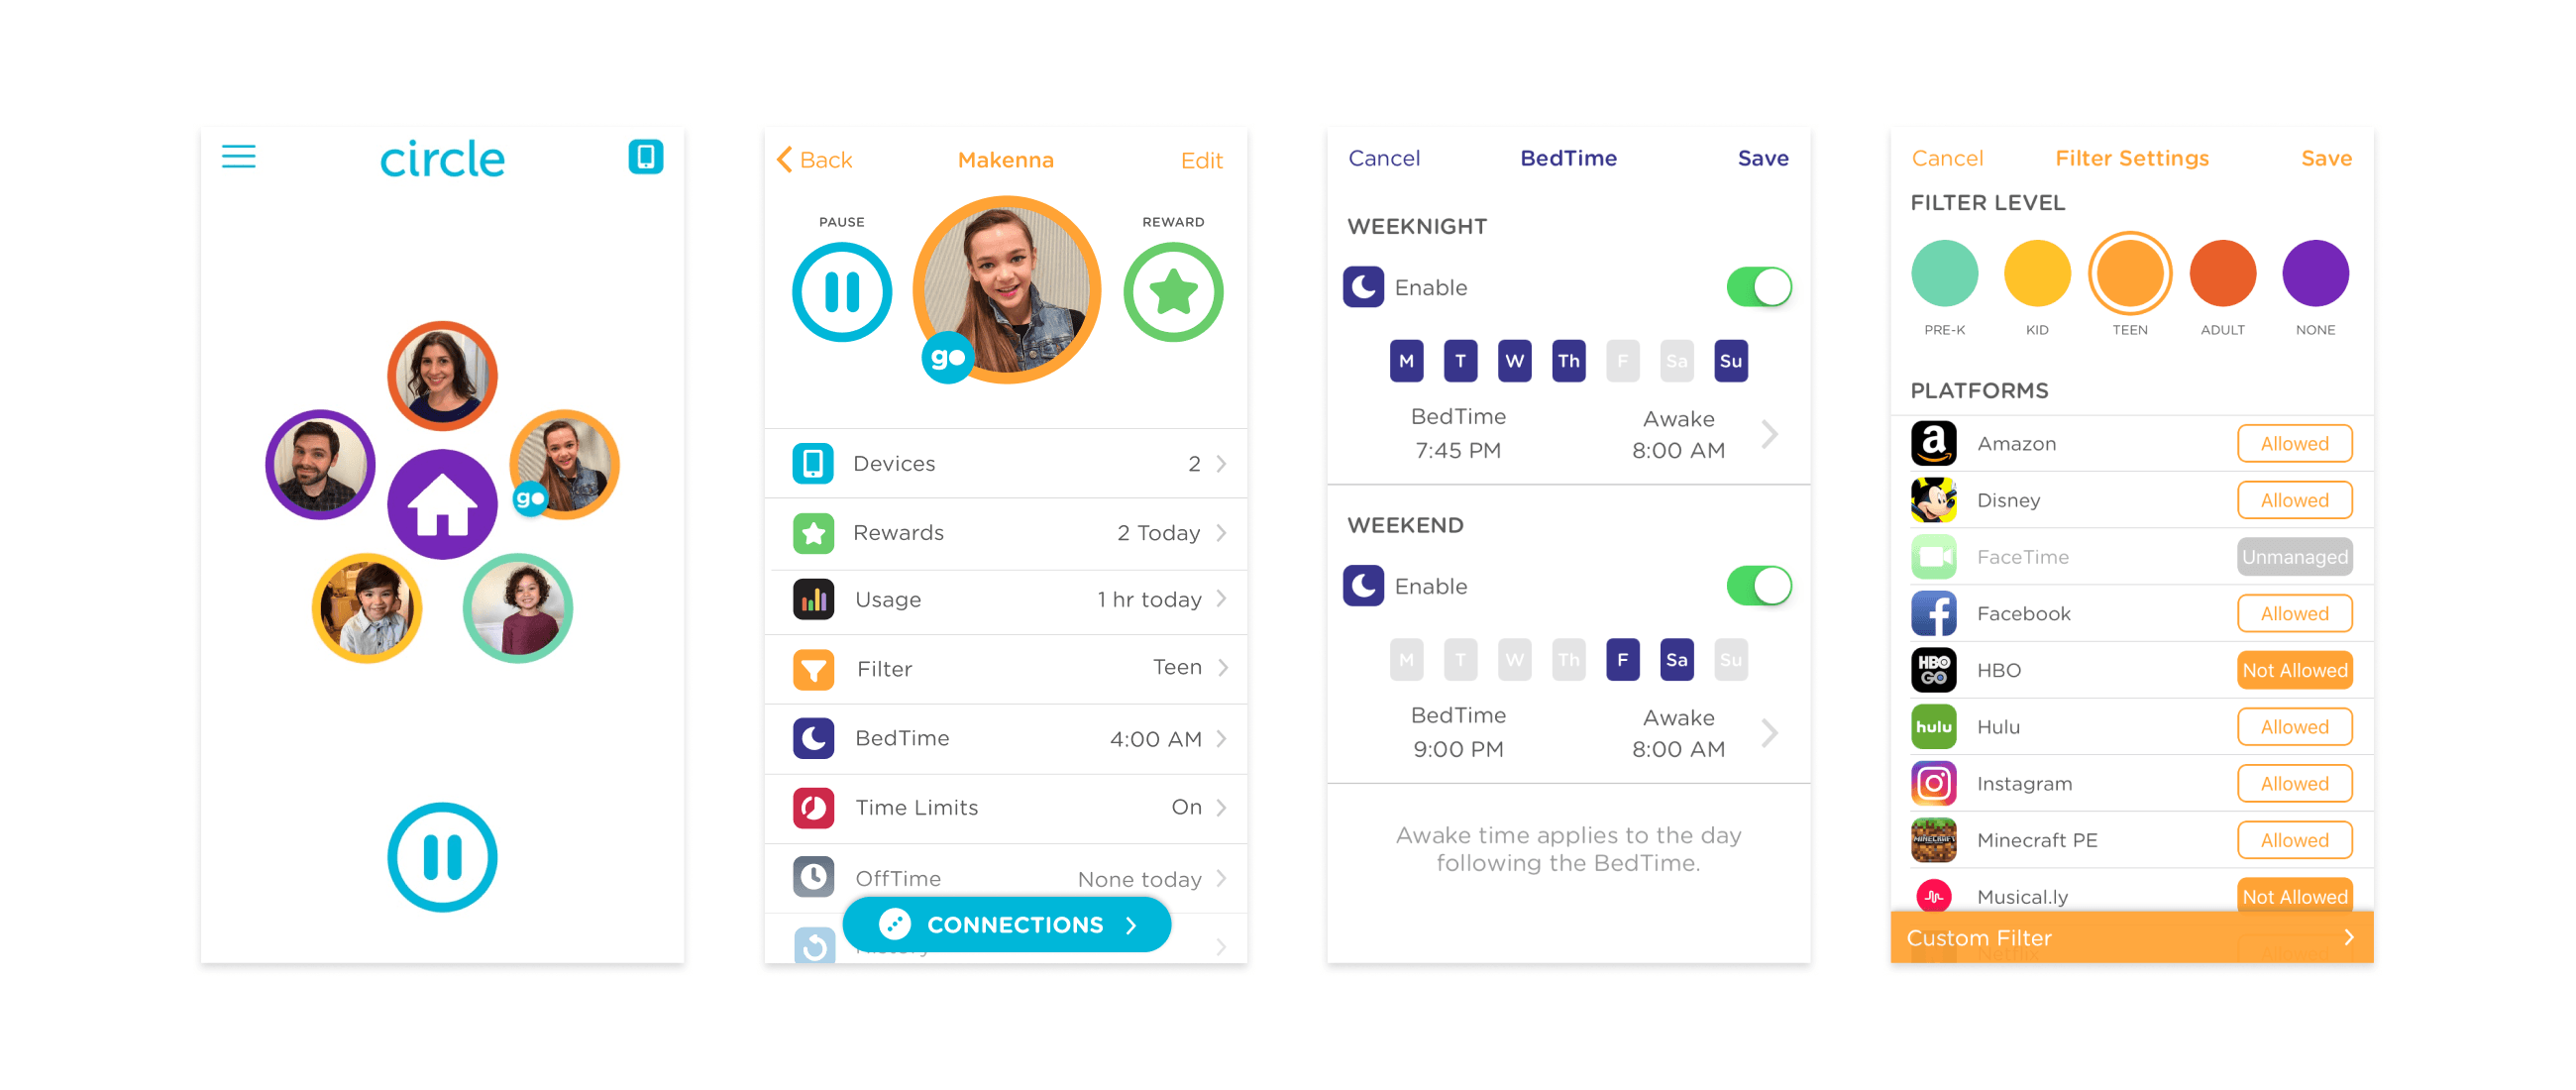 Circle With Disney provides a simple solution for parents trying to manage today's complicated technologies. It helps keep kids, tweens and teens safe online with parental controls that make sense. 